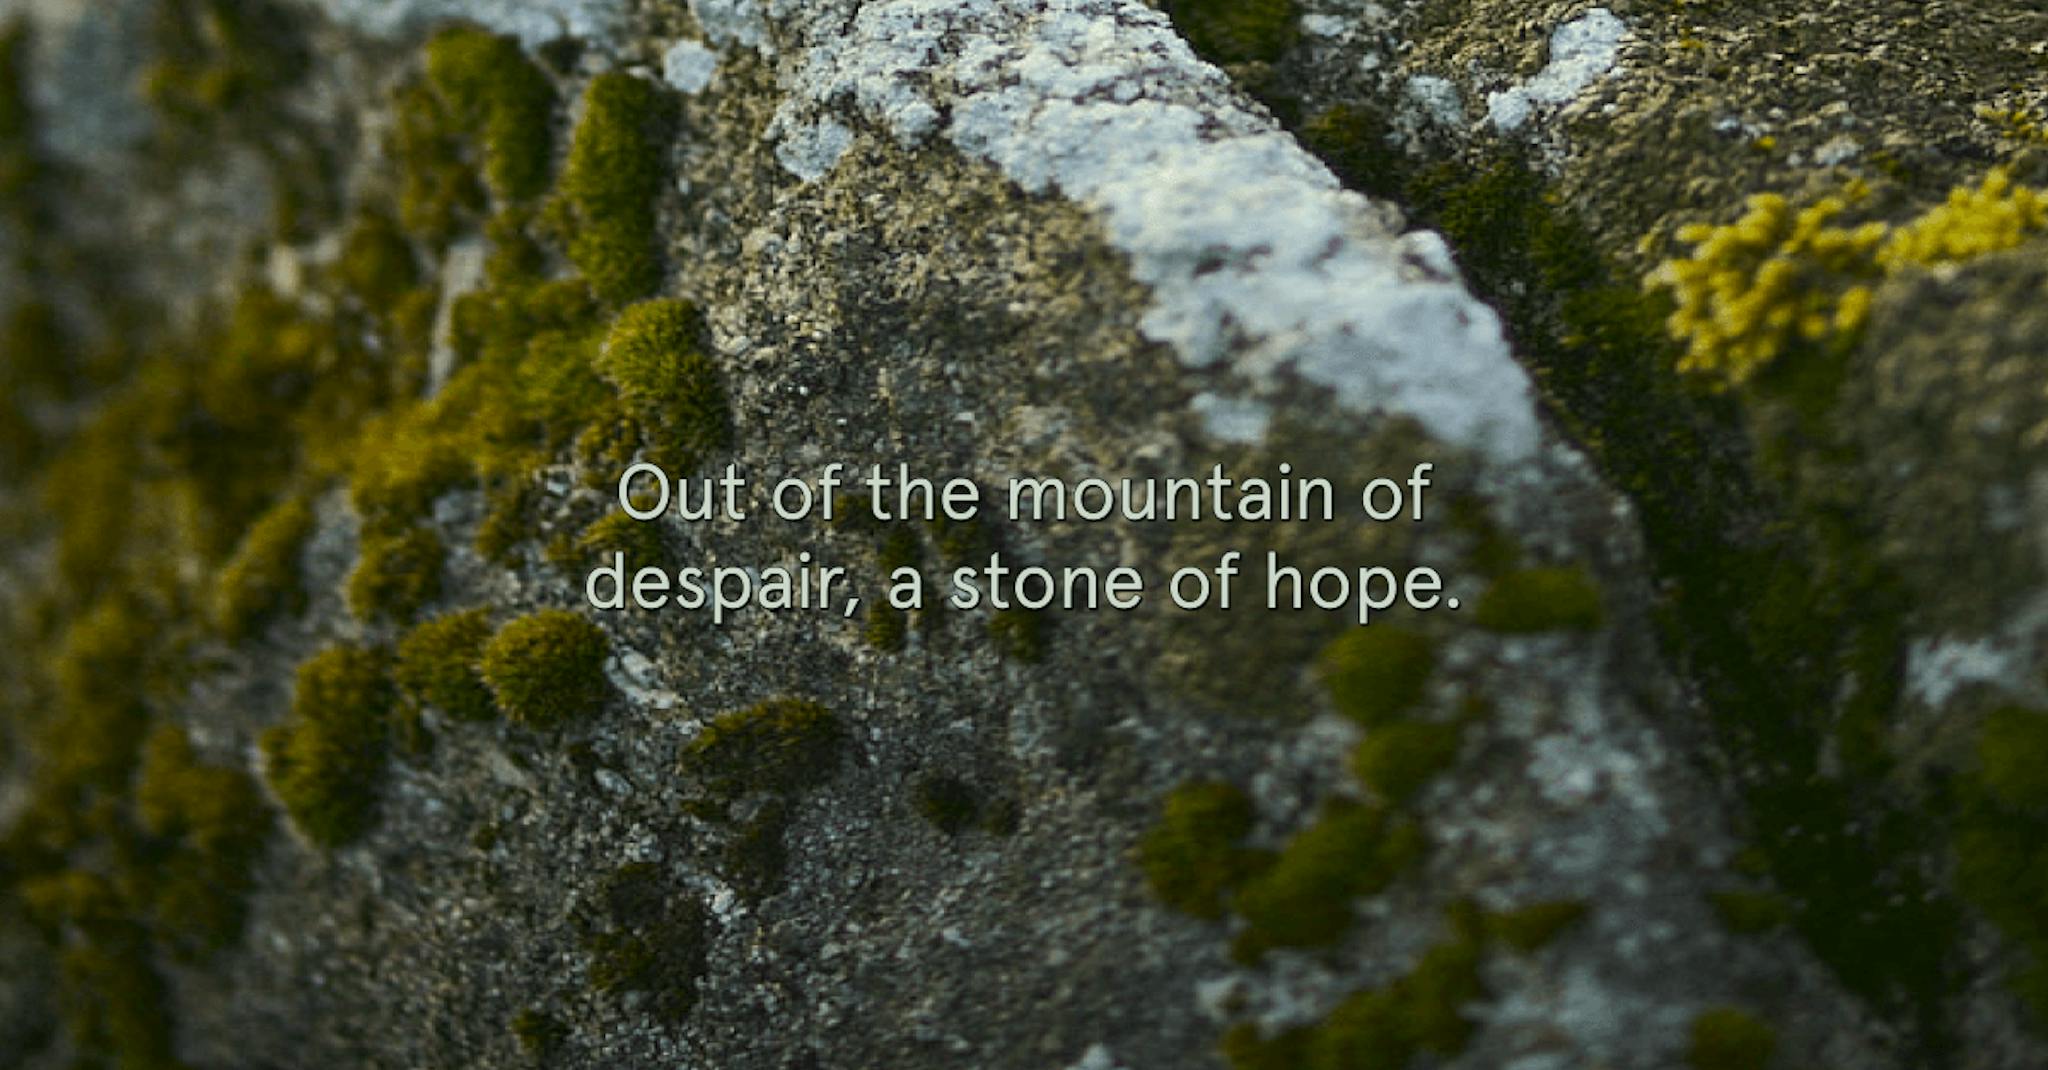 A textural image of a rock and moss with the words "Out of the mountain of despair, a stone of hope." 